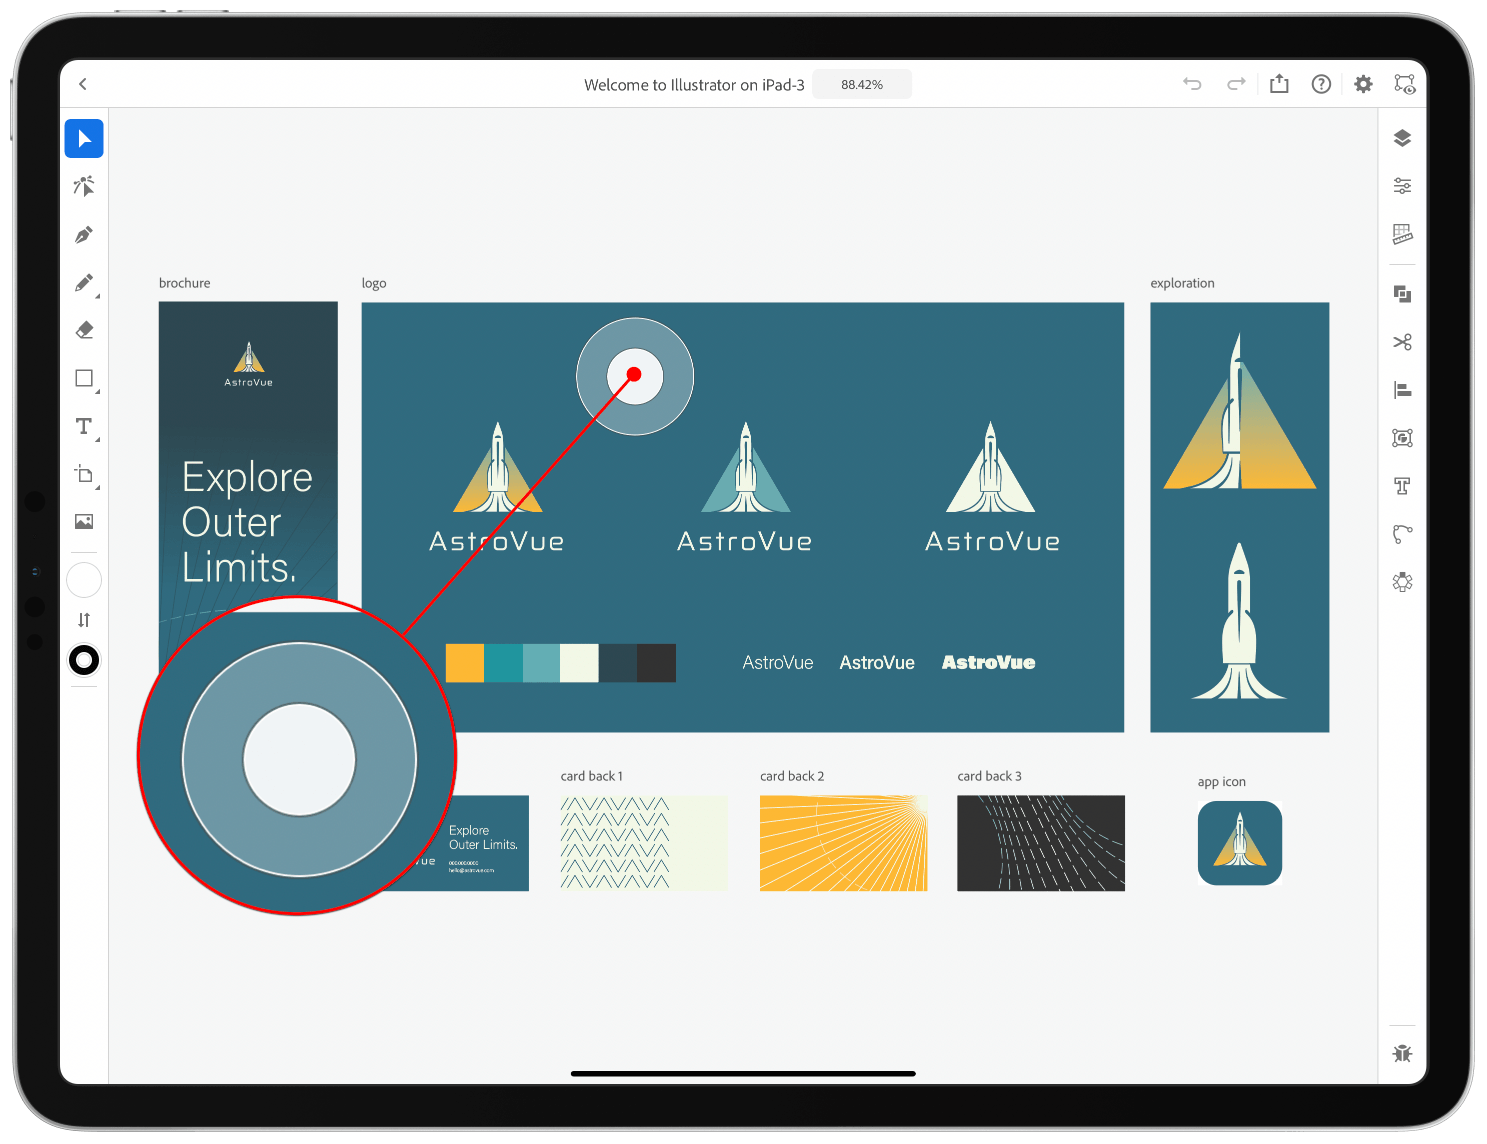 Illustrator's touch shortcut UI, first introduced with Photoshop for iPad.